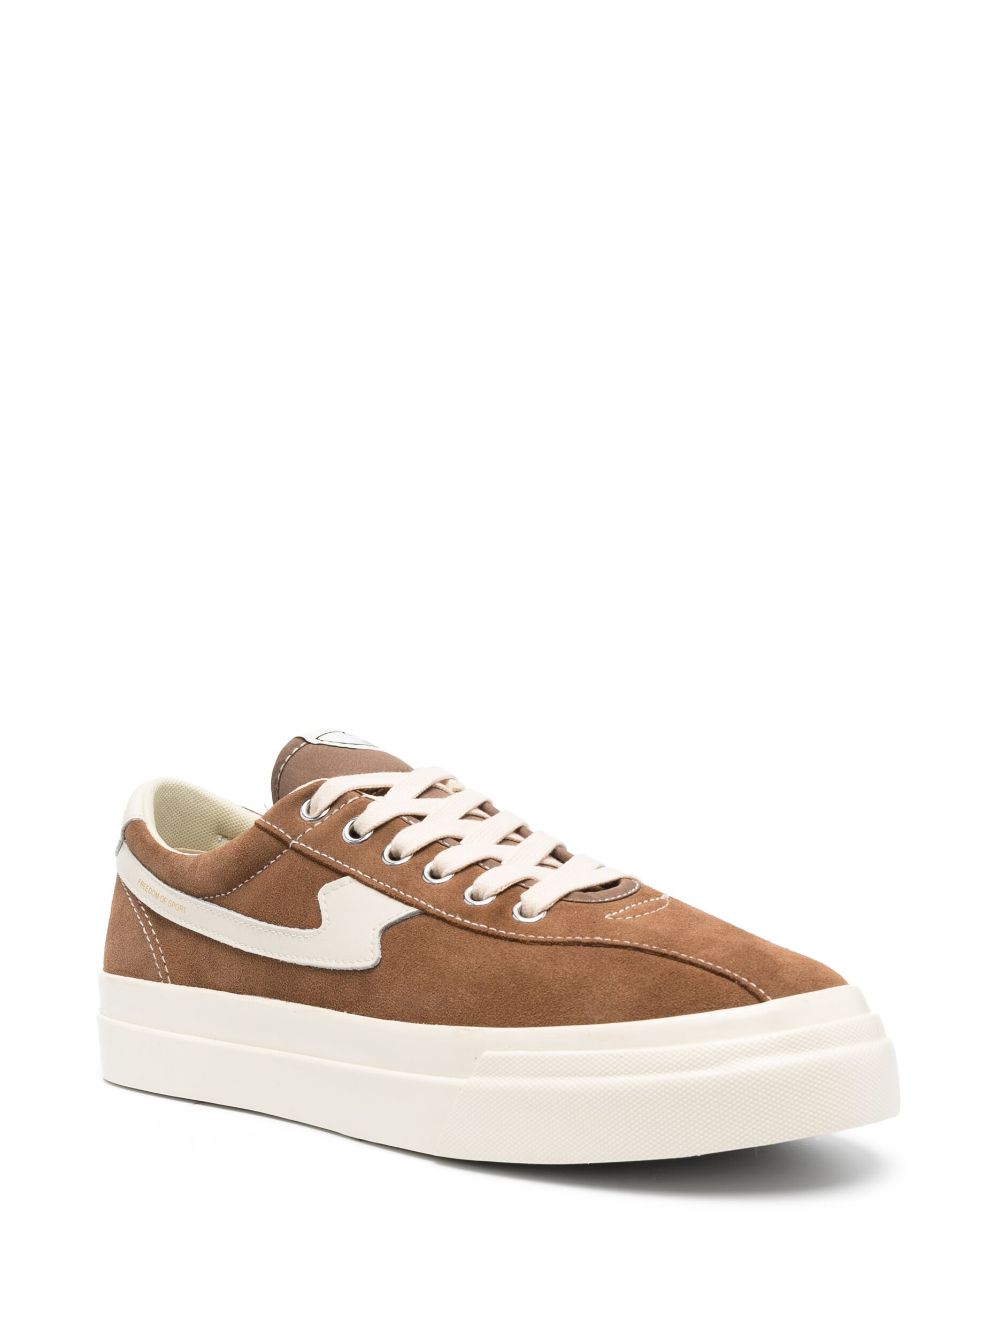 Image 2 of Stepney Workers Club Dellow S-Strike suede sneakers